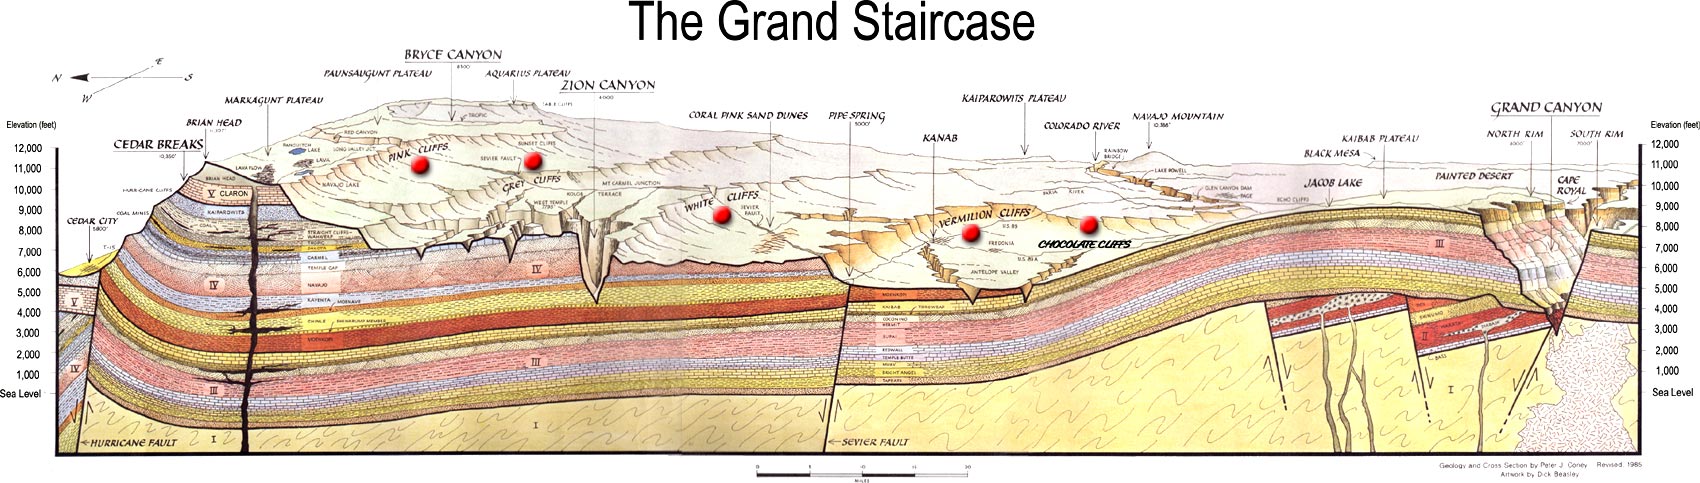 Cross-section showing the same sedimentary strata from the Grand Canyon to Zion Canyon, Bryce Canyon, and Cedar Breaks.